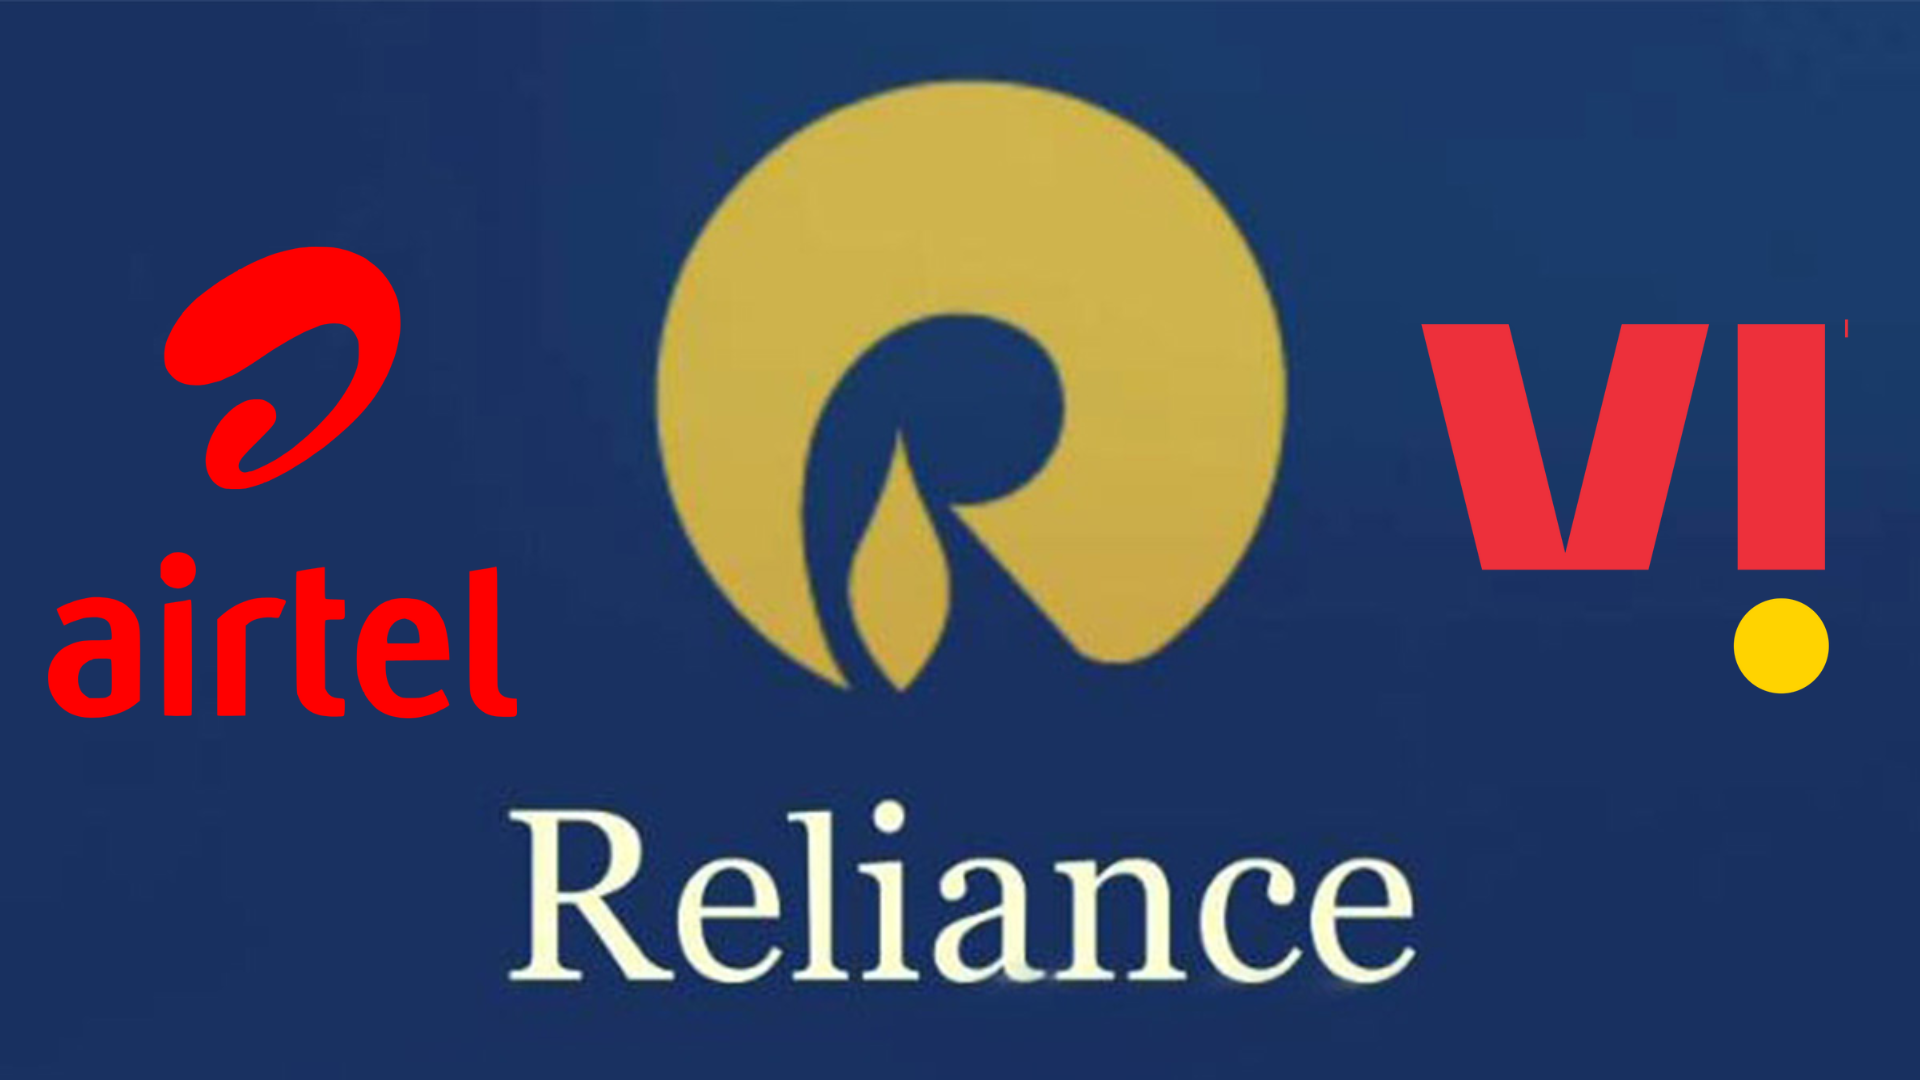 How is Reliance Expanding Its Telecom Rivalry Beyond India With This Agreement Involving Airtel And Vodafone?